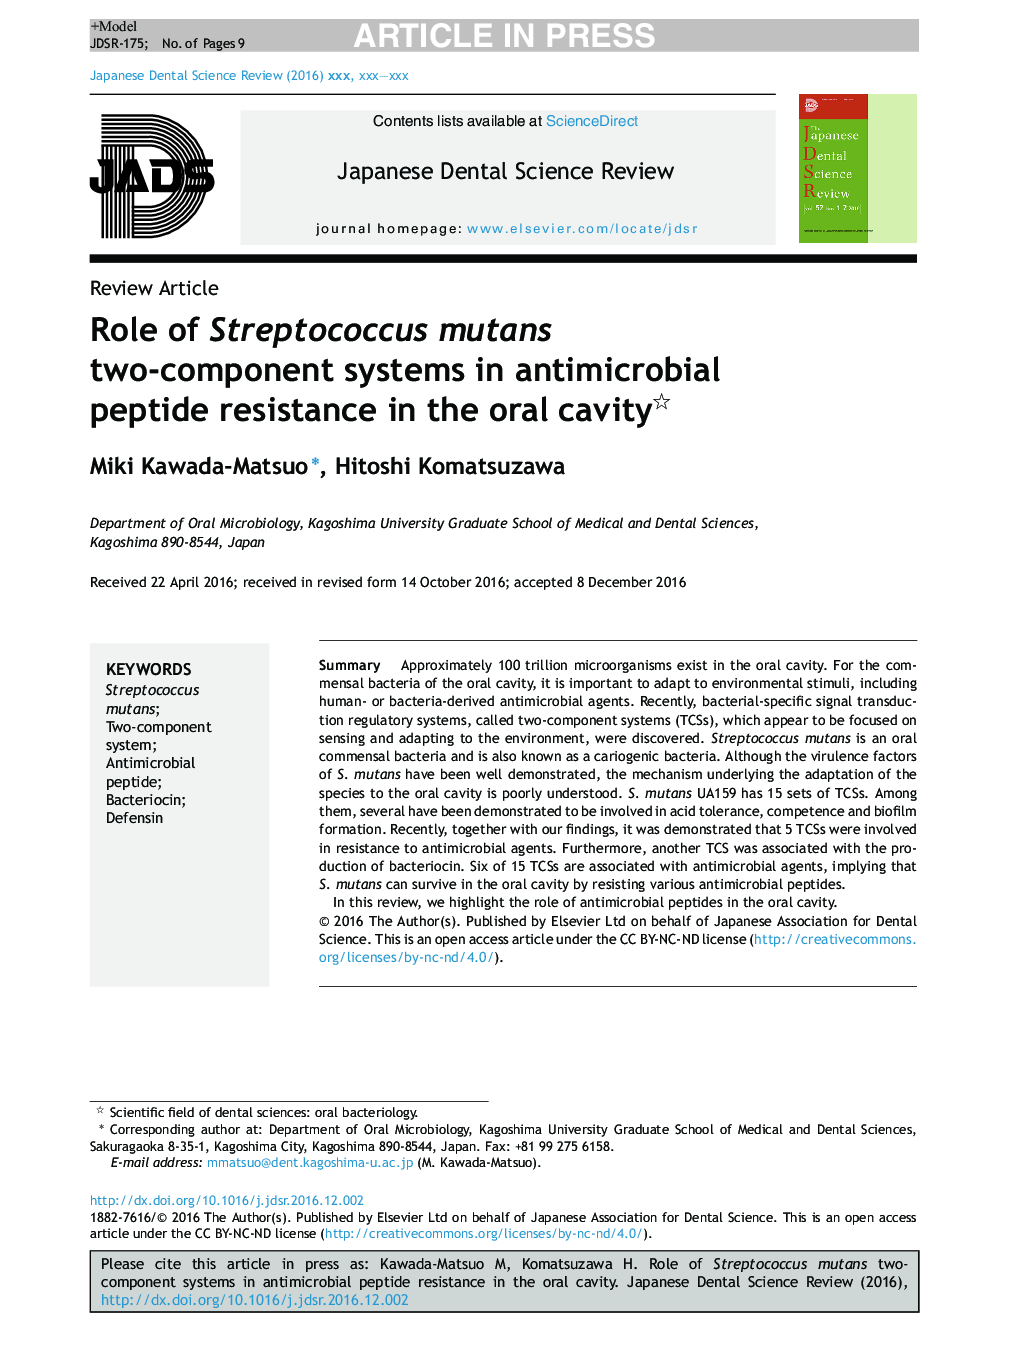 Role of Streptococcus mutans two-component systems in antimicrobial peptide resistance in the oral cavity